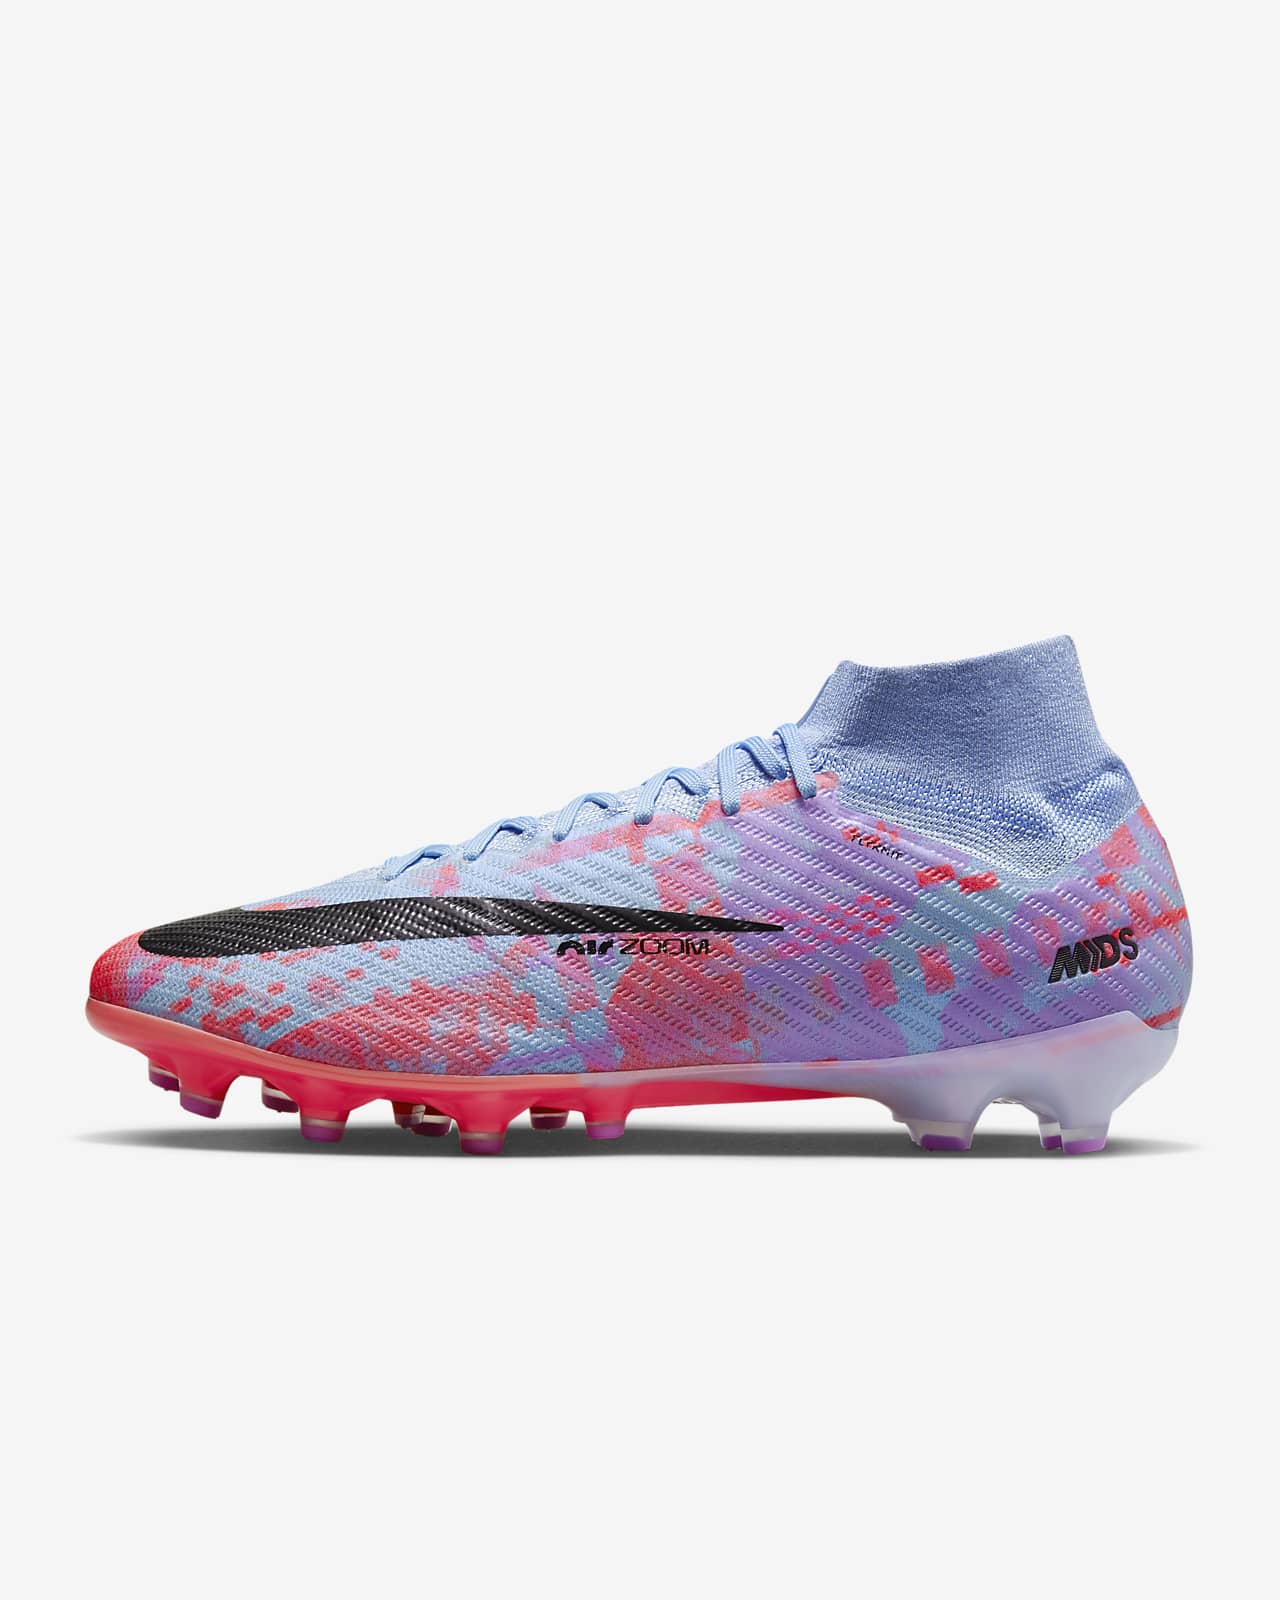 Nike Zoom Mercurial Dream Speed Superfly 9 Elite AG-Pro Artificial-Grass Football Boot